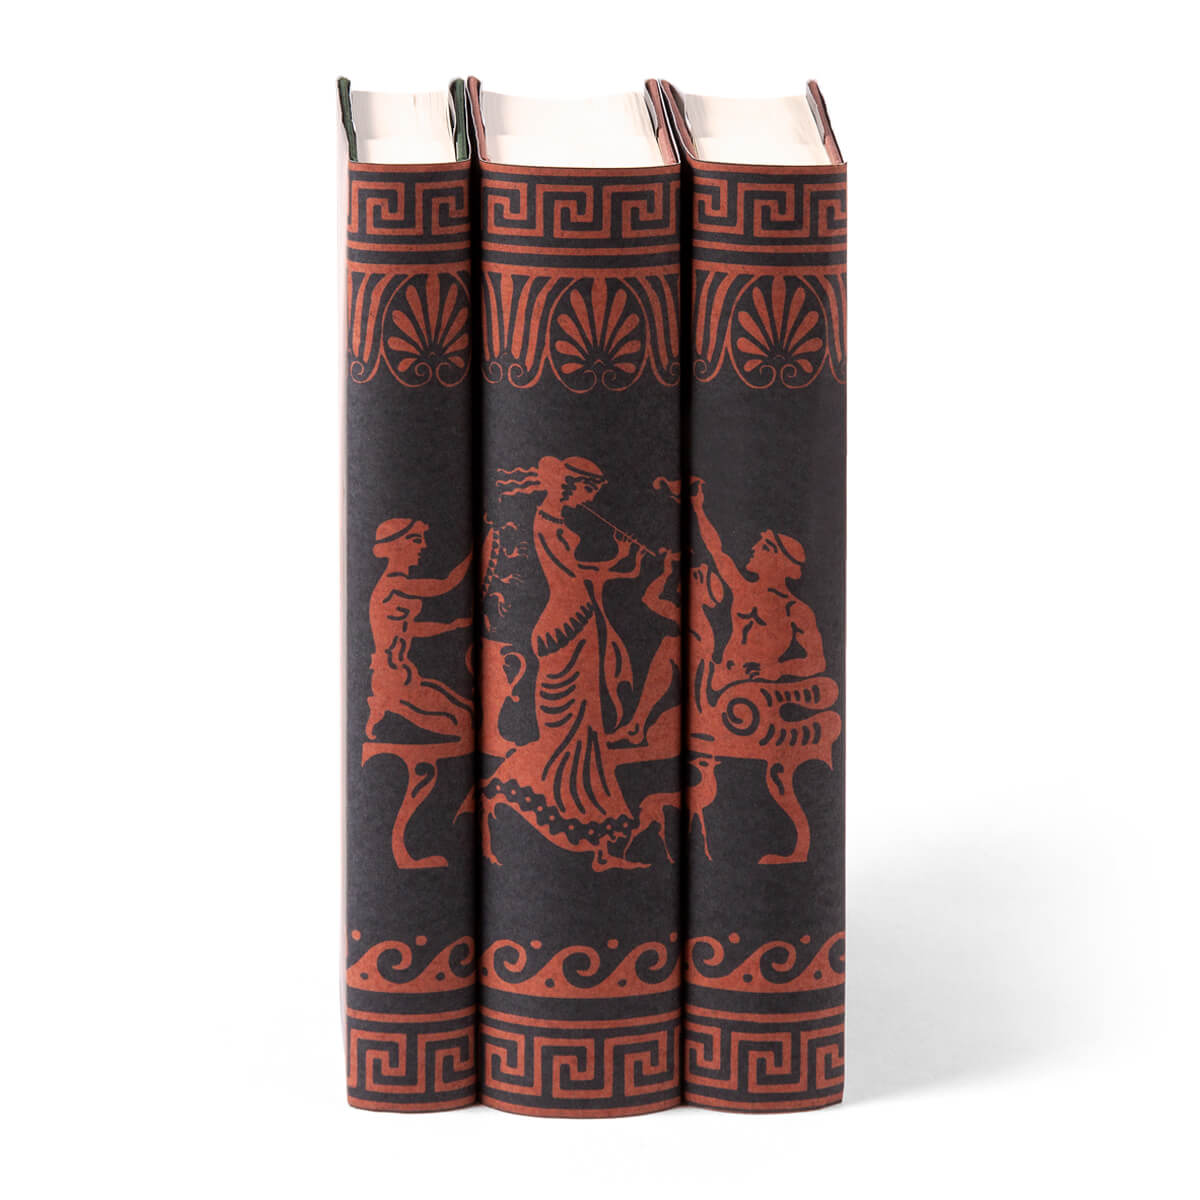 The beauty of Greek art and literature come together in this beautiful three volume set of classics. Order the three book set as shown, and we will custom make it for you. The custom-printed jackets, inspired by Greek pottery, unify the stories for an eye-catching design on the shelves.